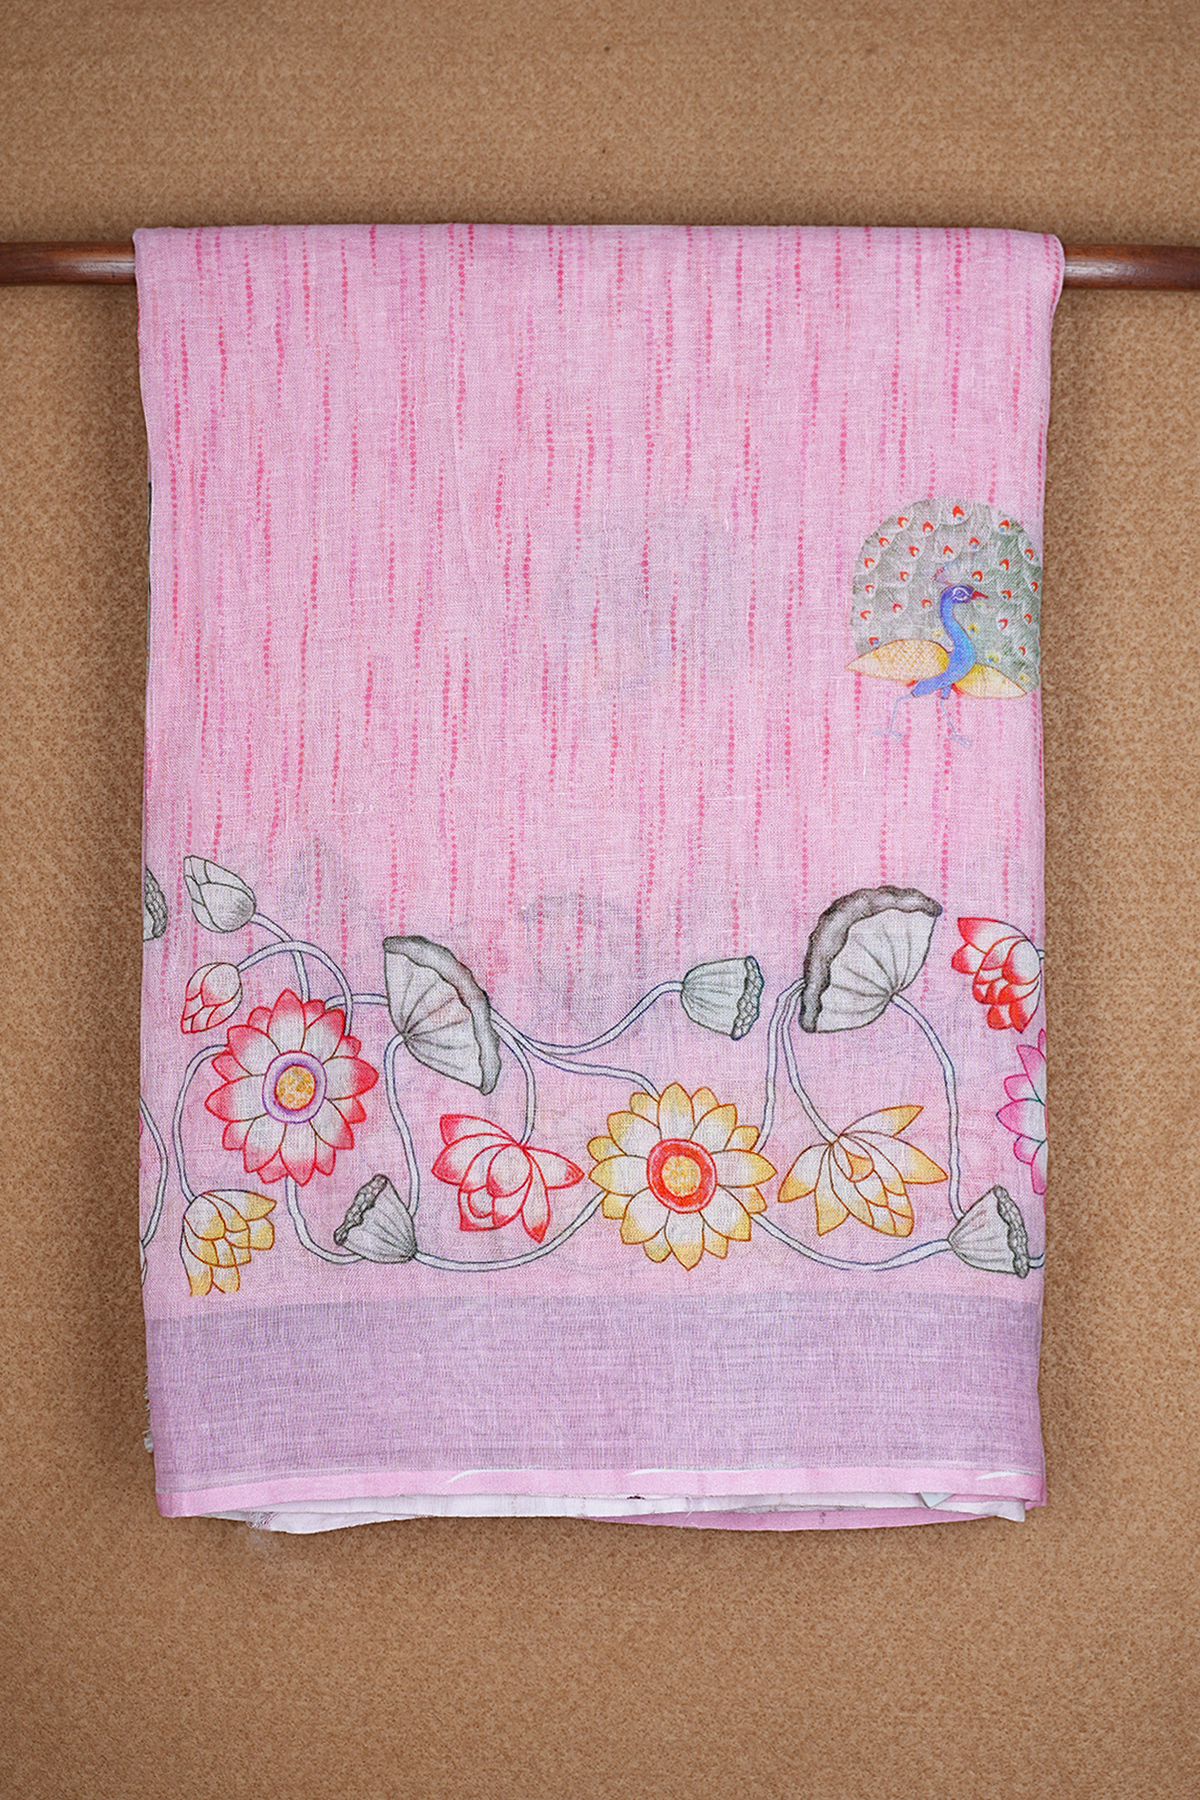 Floral And Peacock Printed Pastel Pink Linen Saree